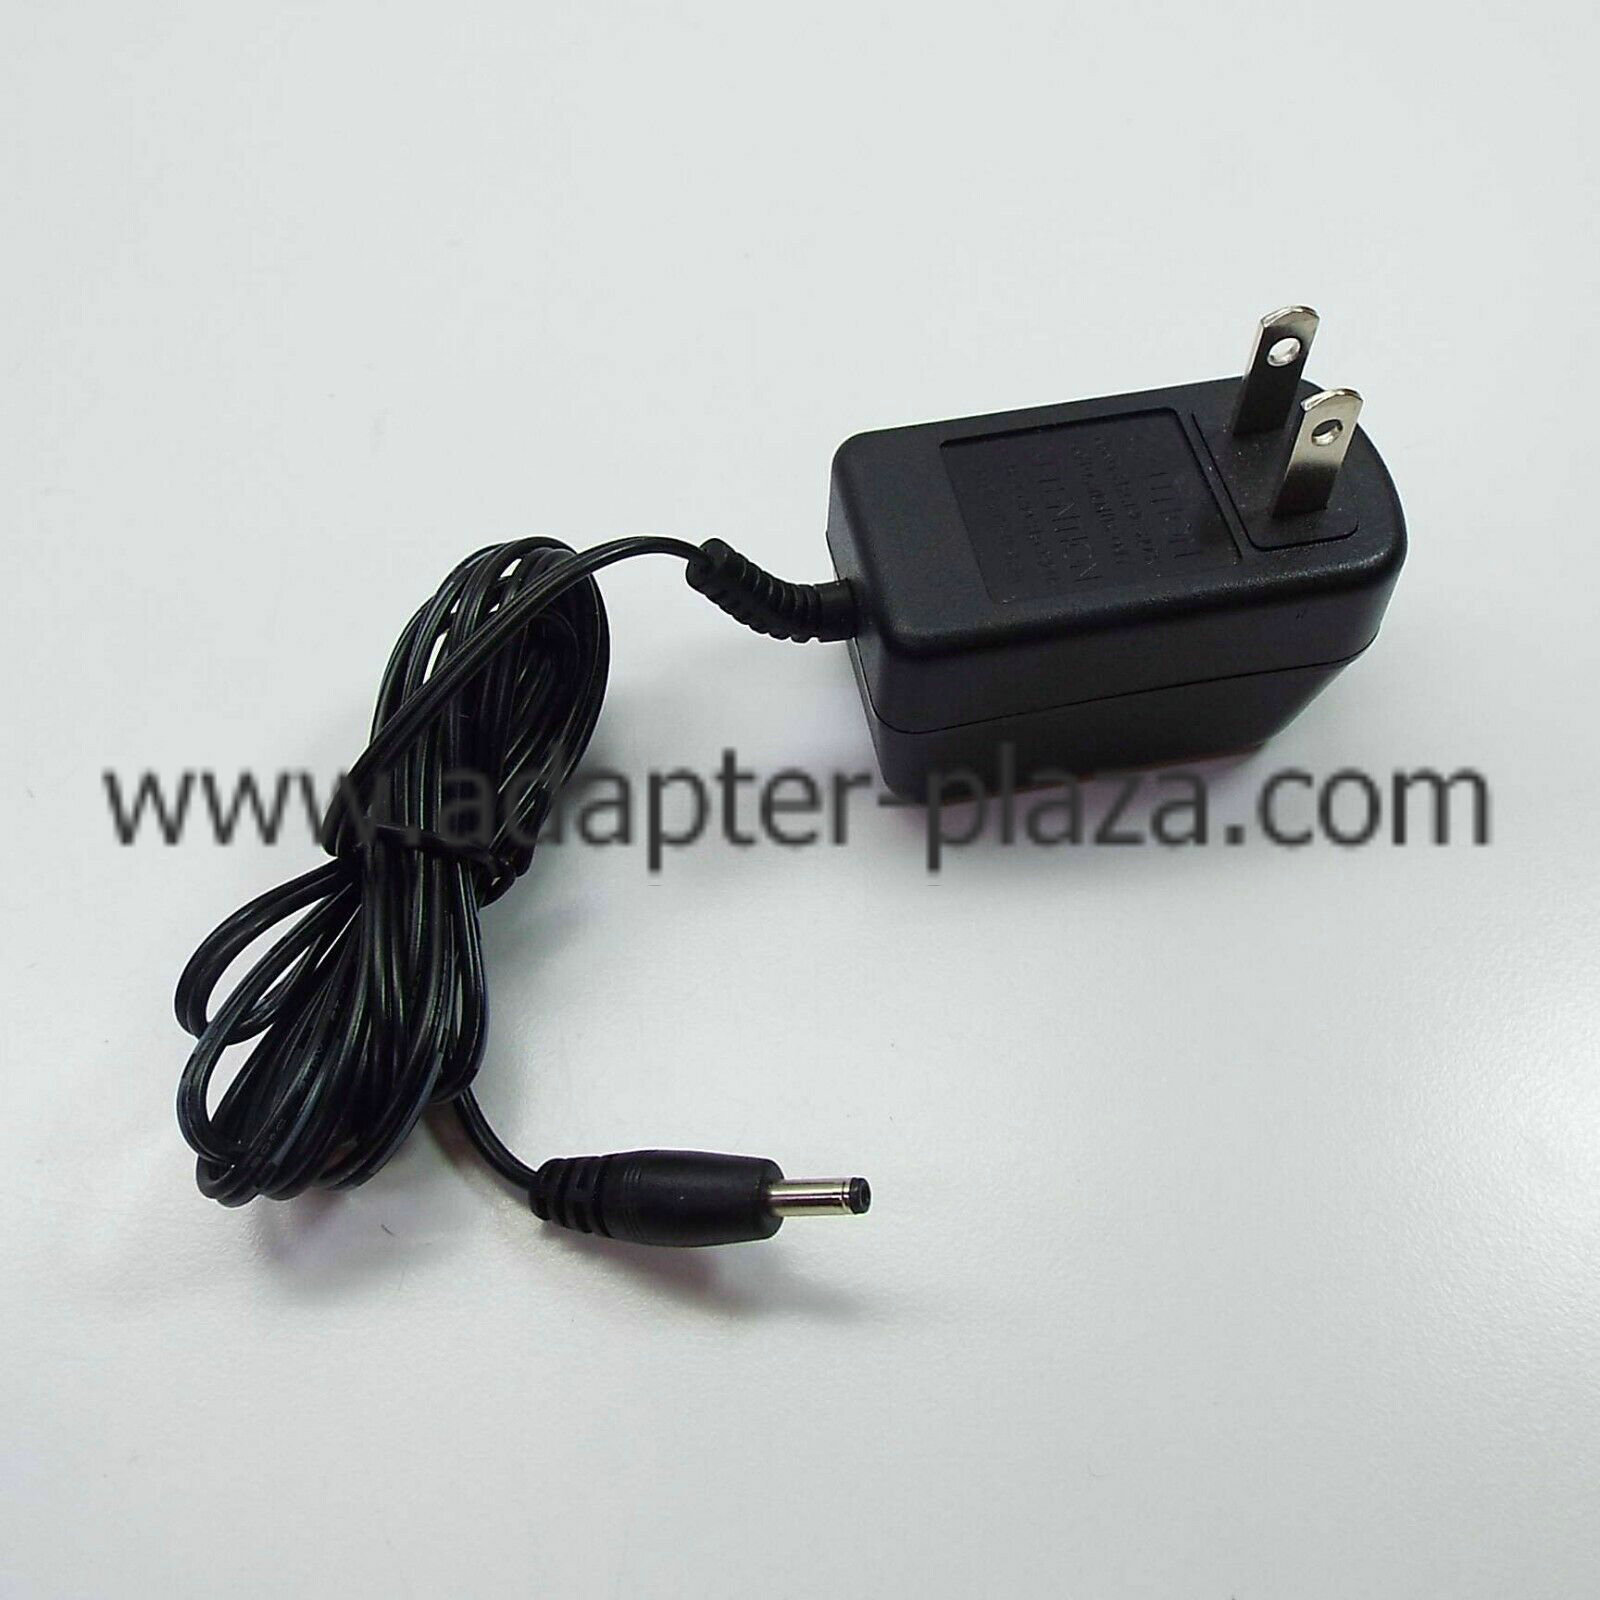 *Brand NEW* R-28-0600100D 6.0V 100MA AC DC Adapter POWER SUPPLY